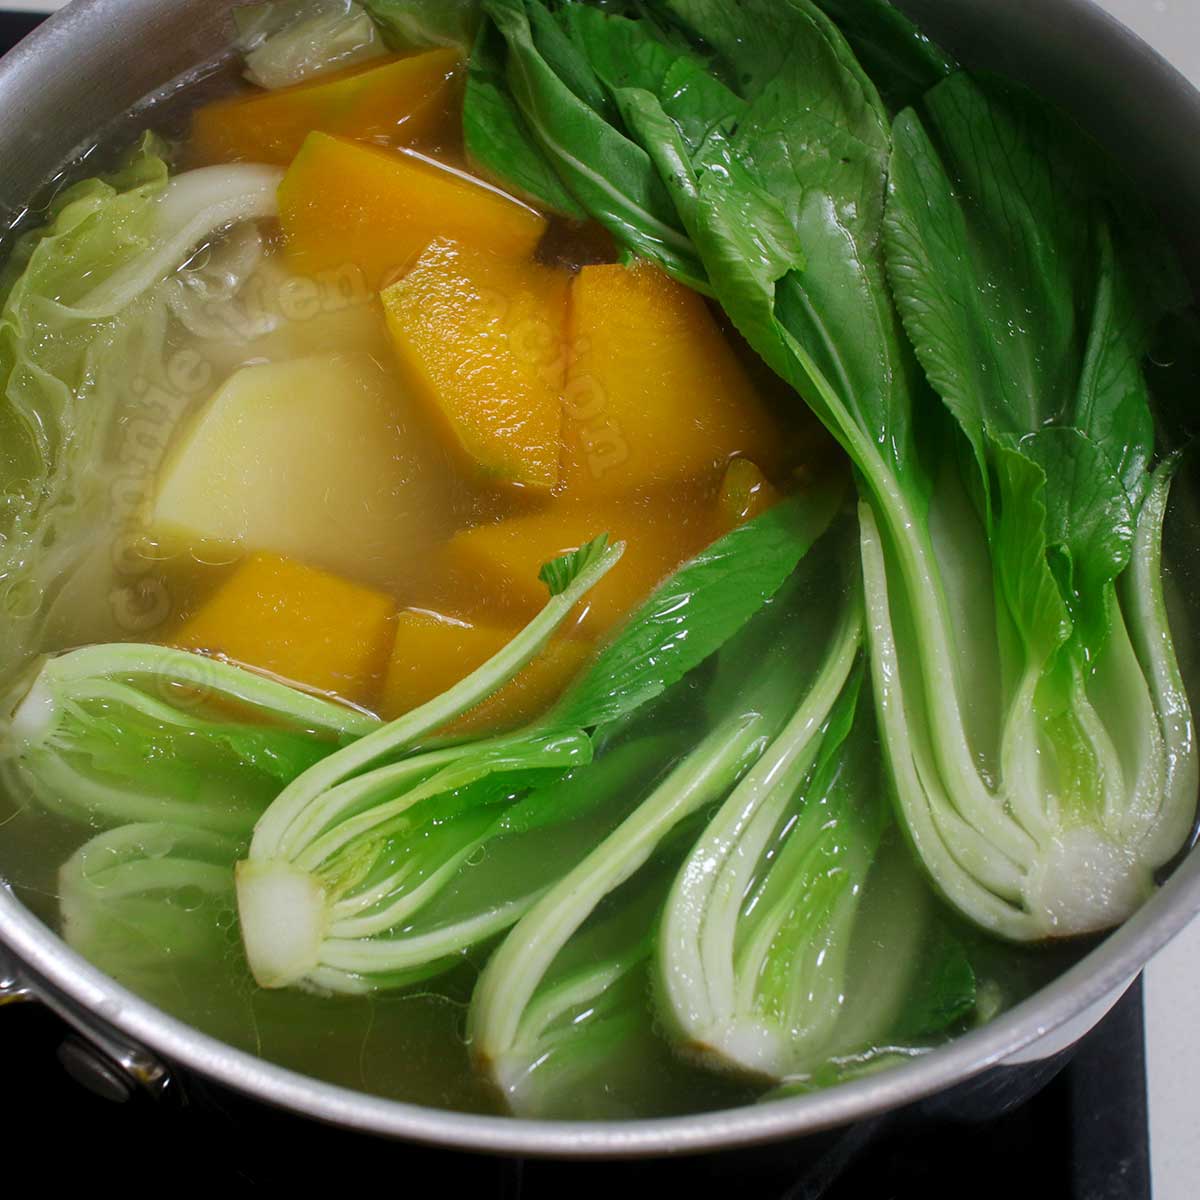 Boiling squash, potattoes, cabbage and bok choy in chicken broth